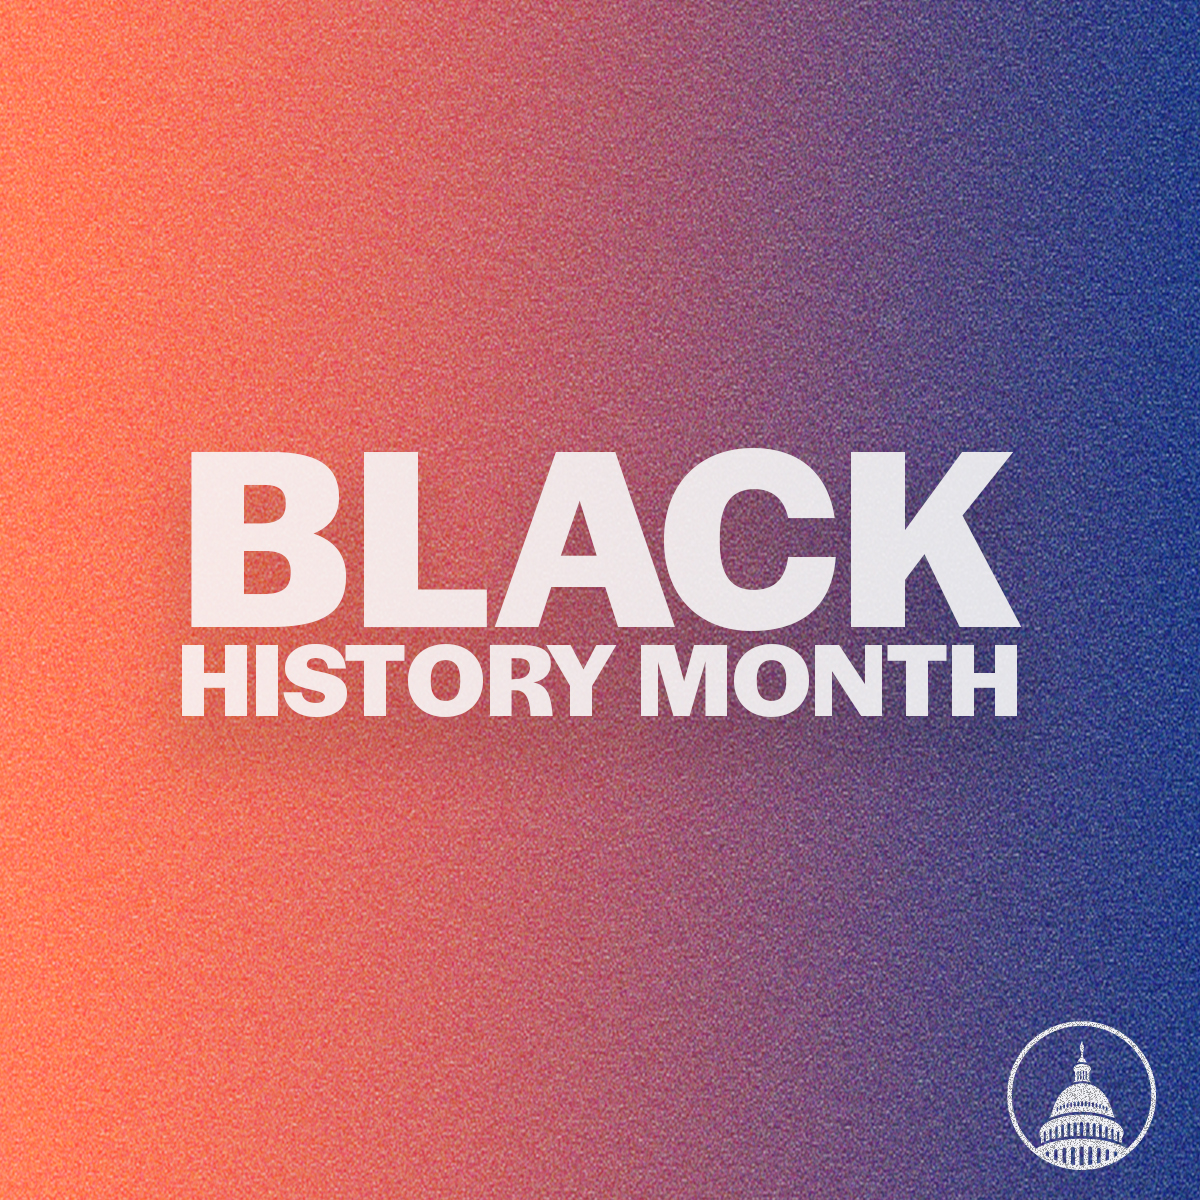 Today begins #BlackHistoryMonth, when we recognize Black Americans, their enormous contributions to the history, present, and future of our country, and their heroic struggles to make our nation a more perfect Union.